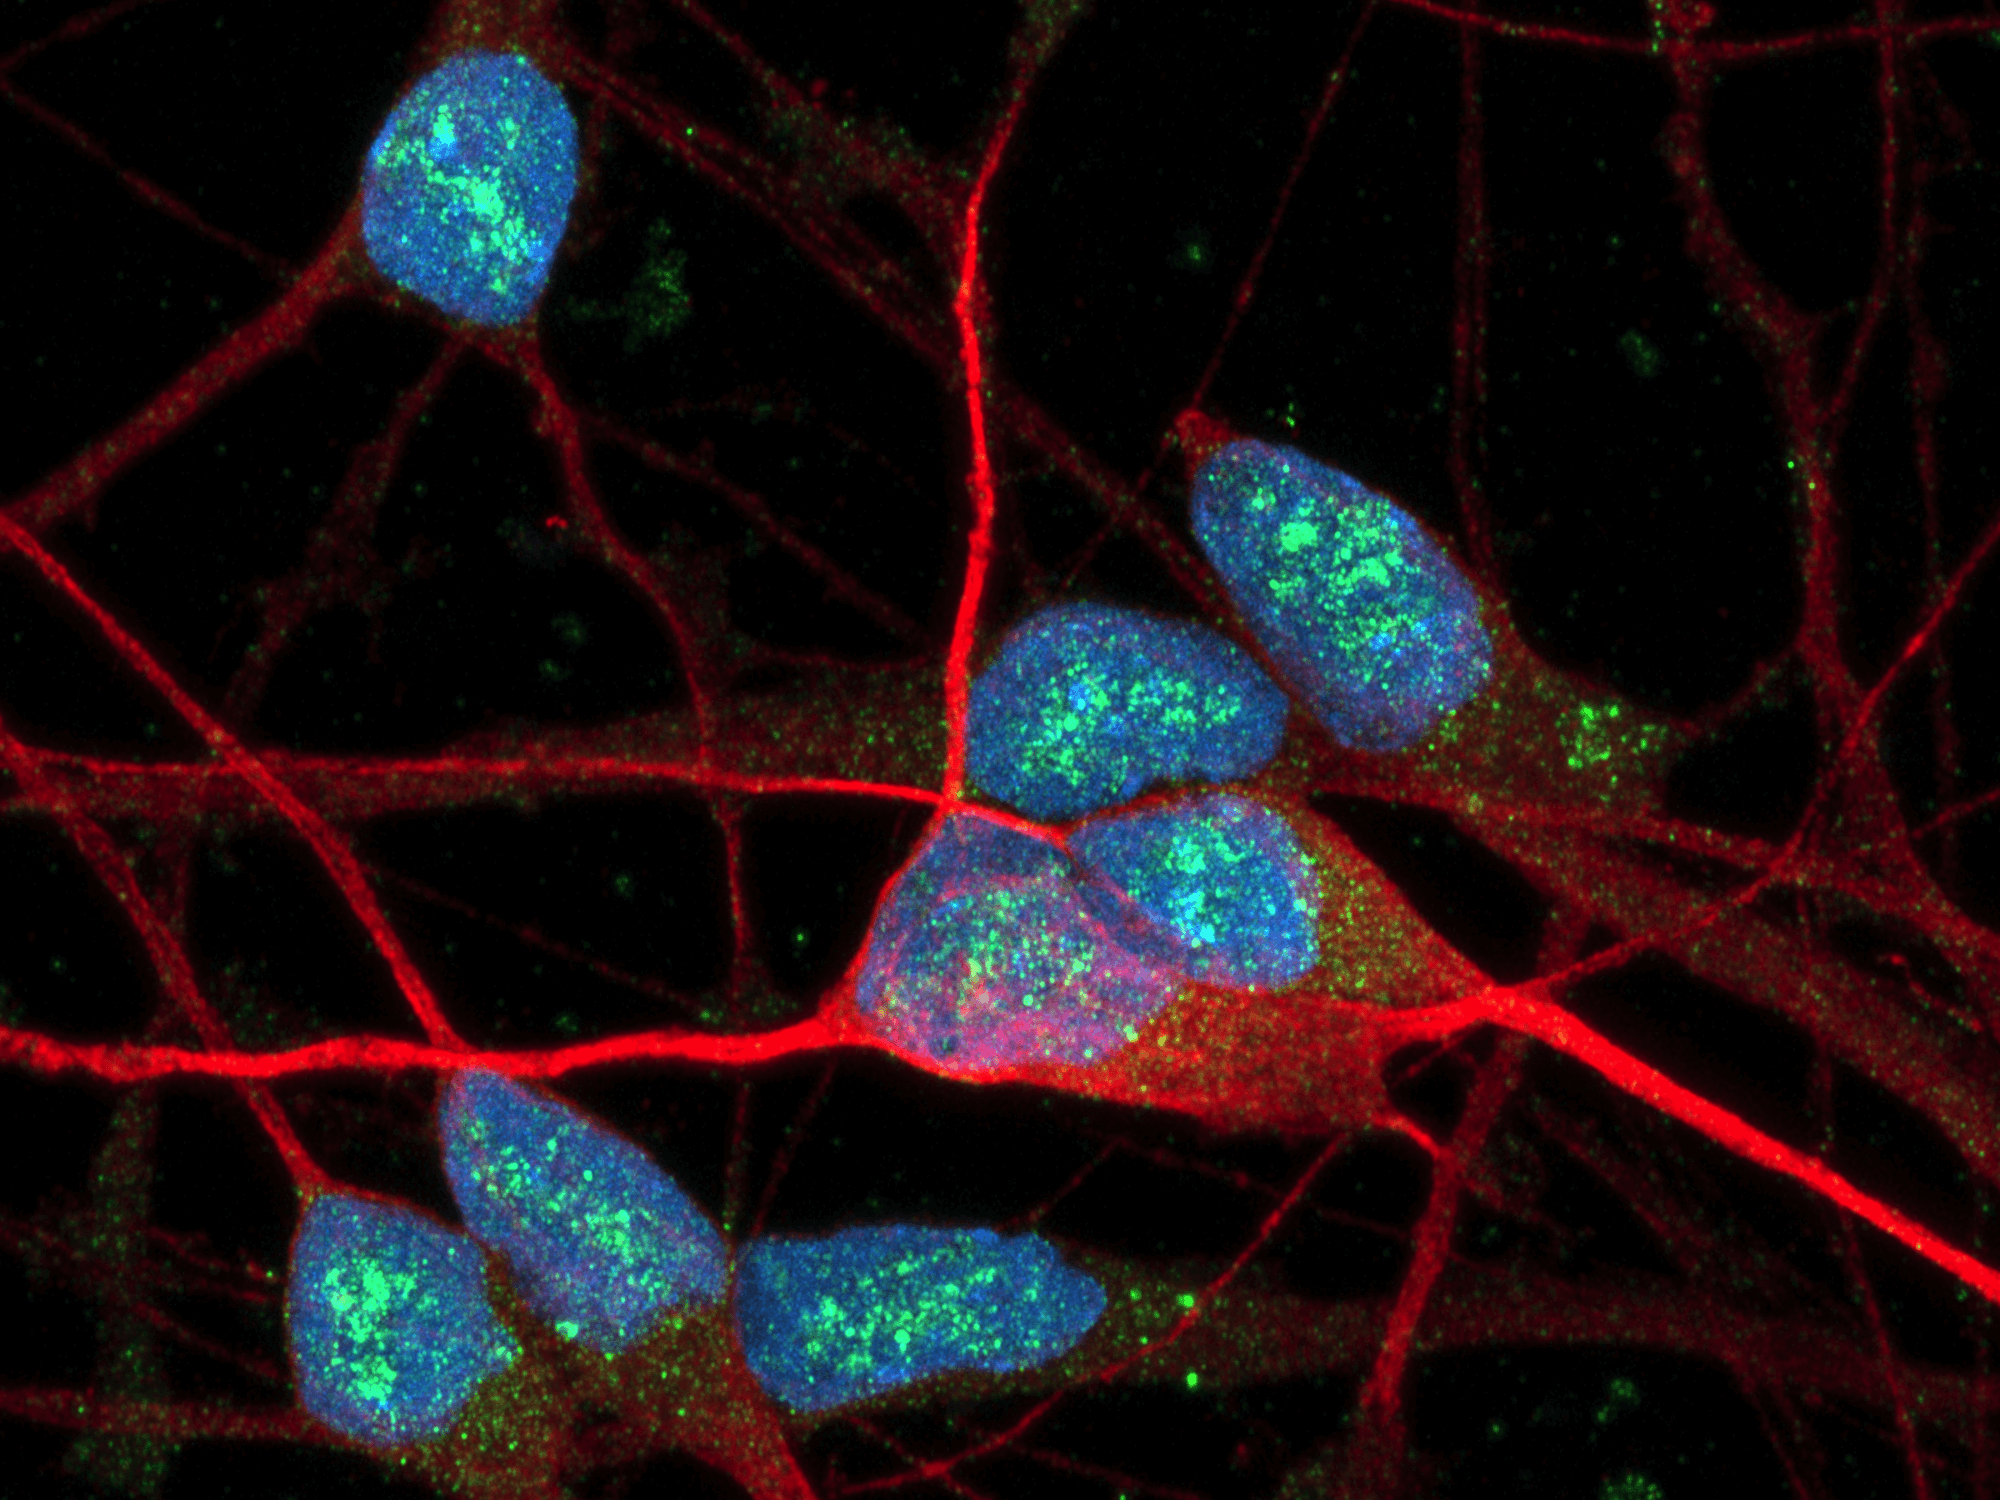 Close-up image of several neurons, nuclei stained blue (DAPI) and cell bodies stained red (MAPT)